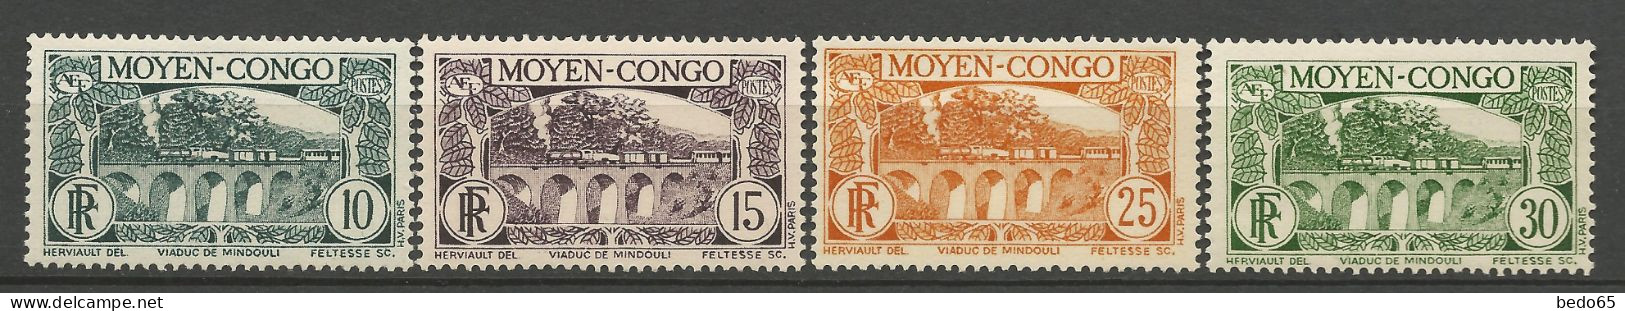 CONGO N° 117 / 118 / 120 / 121 NEUF* TRACE DE CHARNIERE  / Hinge / MH - Unused Stamps